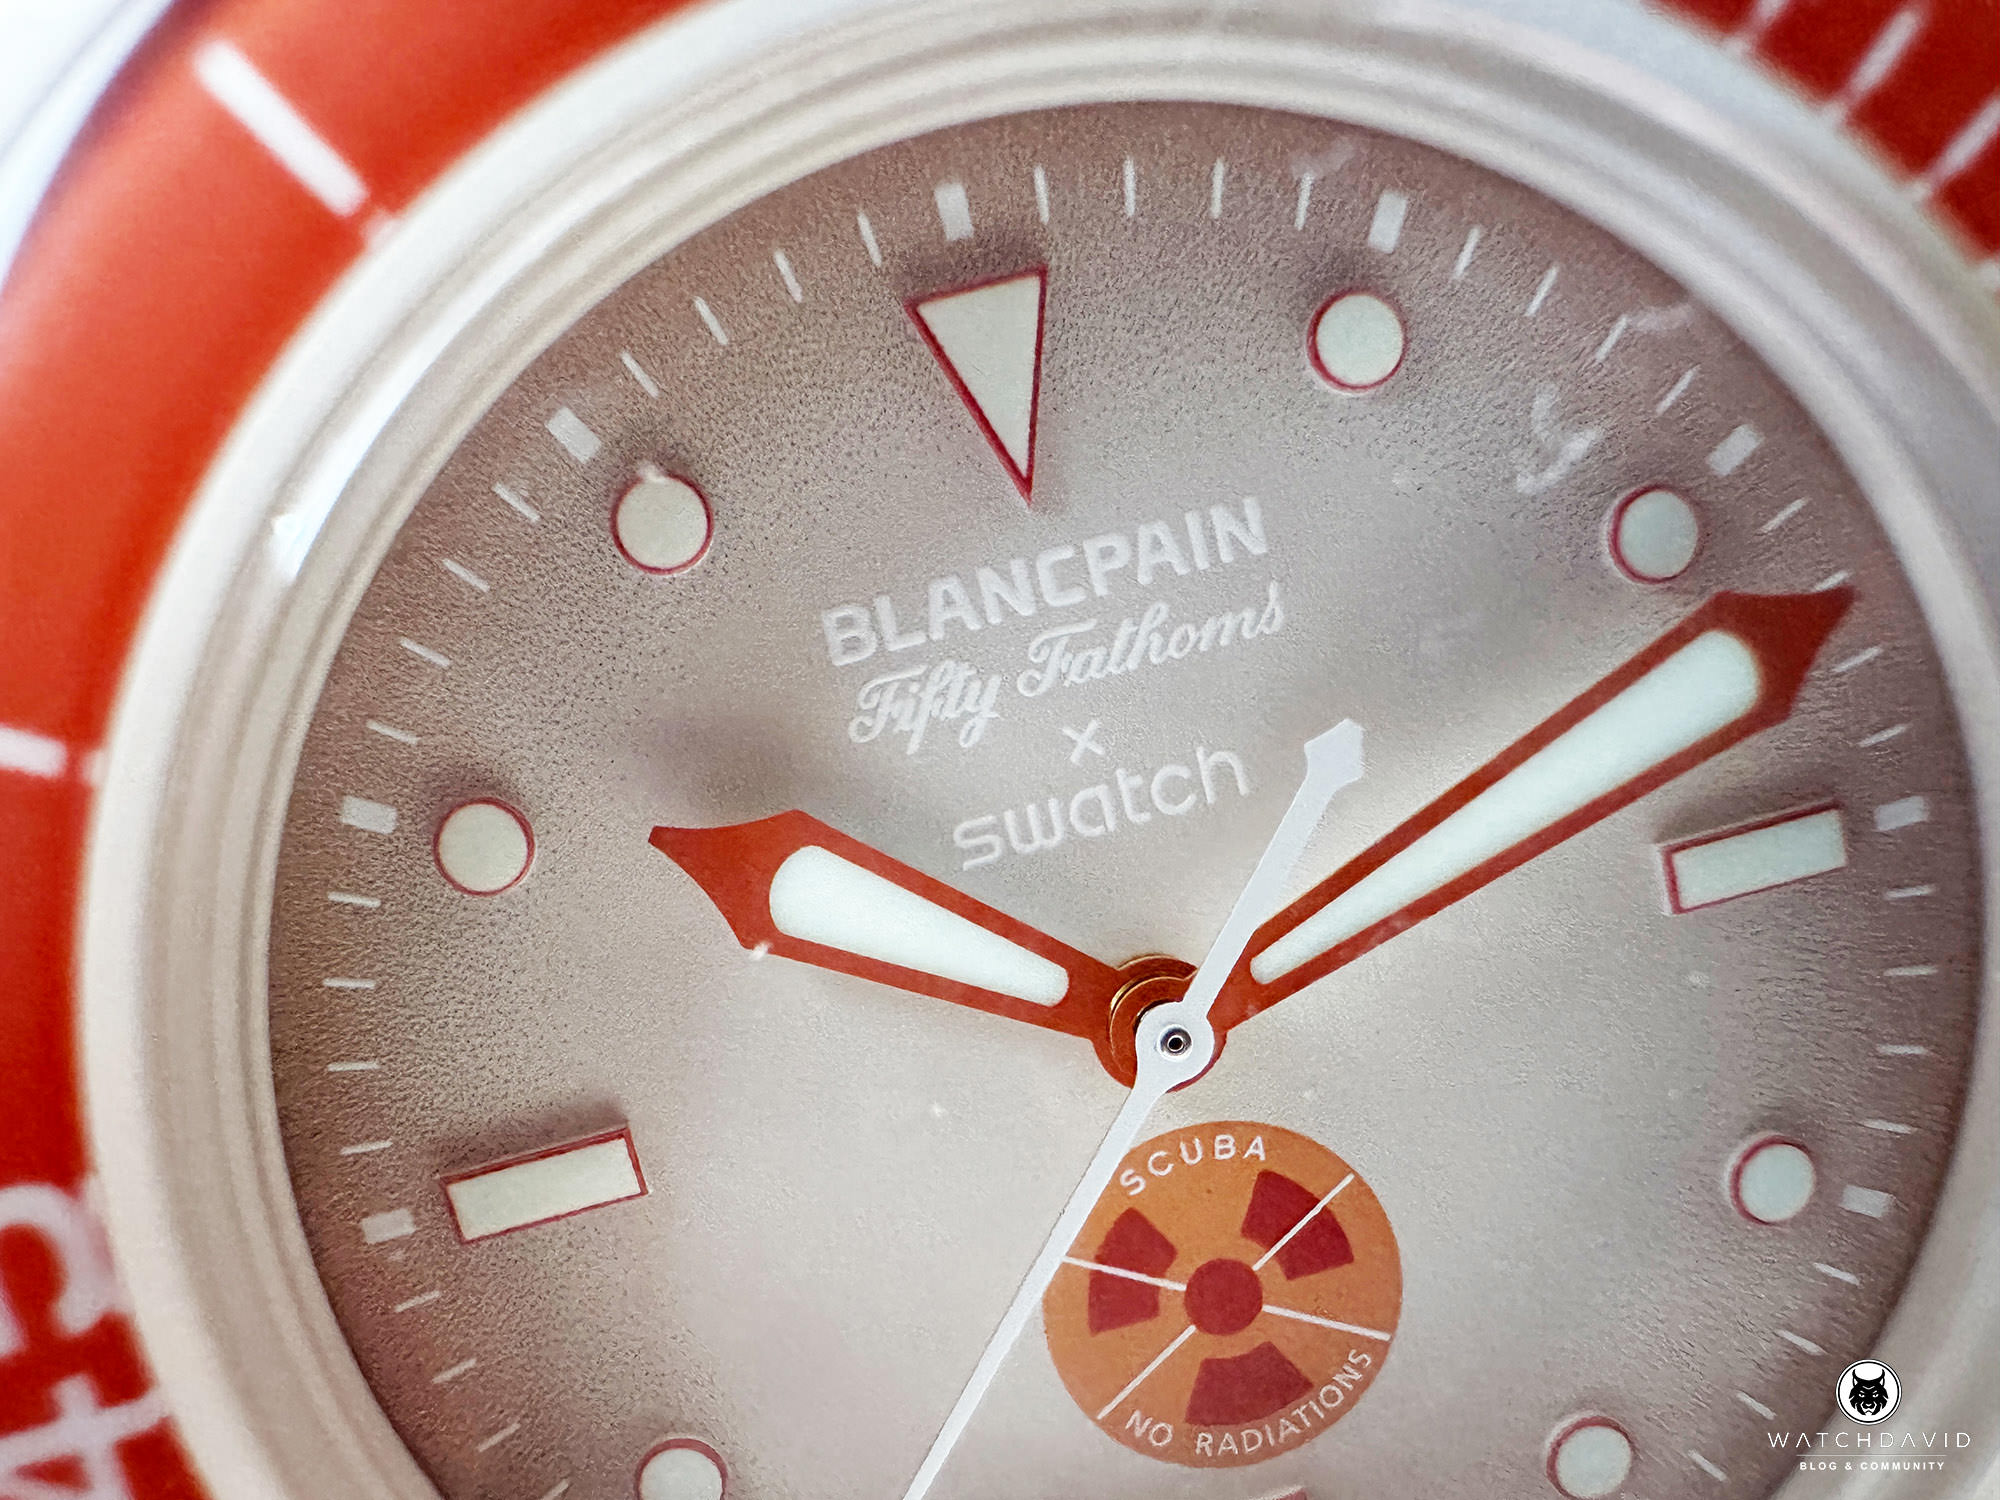 Blancpain x Swatch Arctic Review